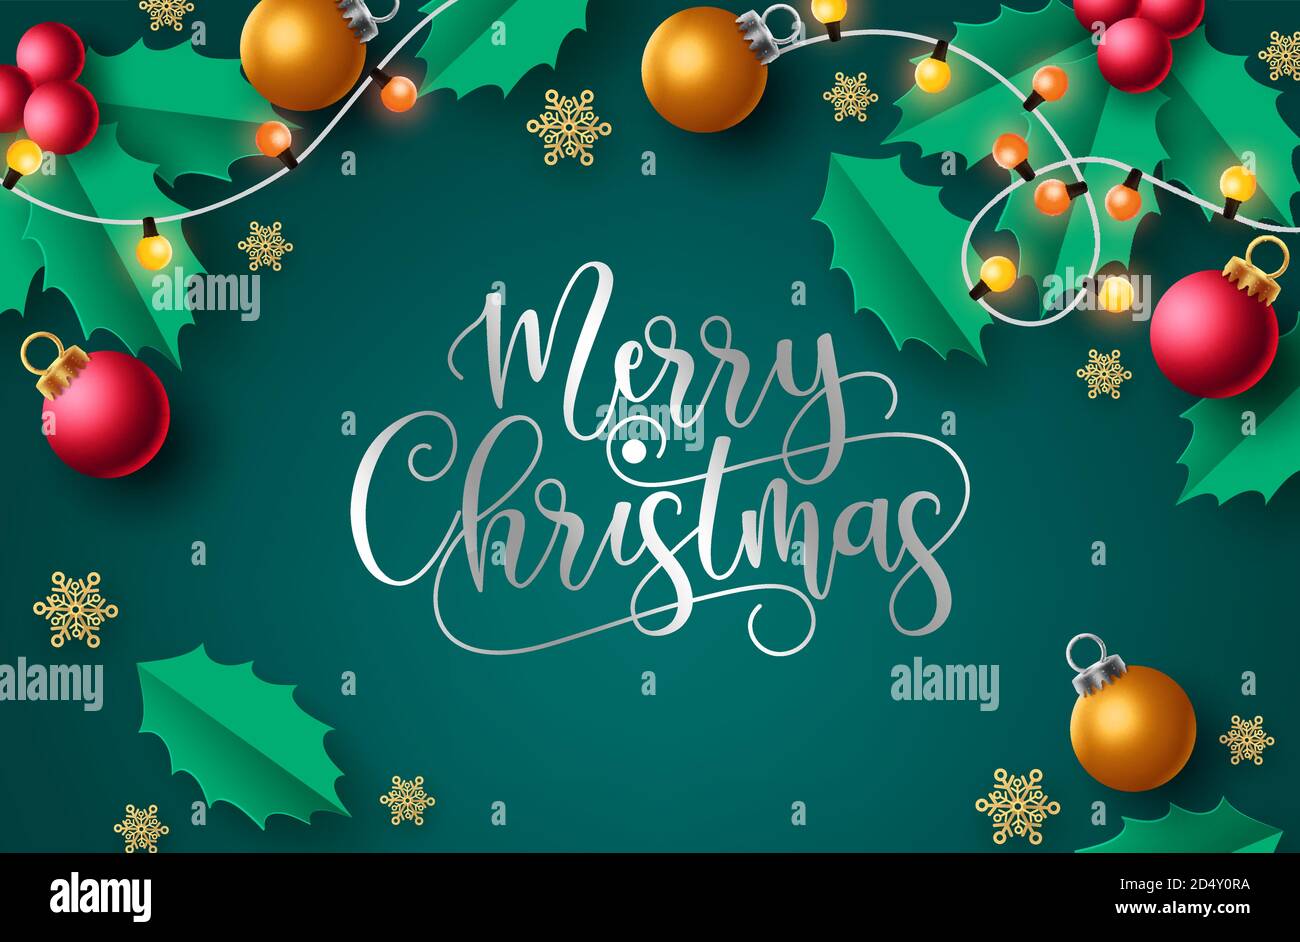 Merry christmas vector background design. Merry christmas greeting ...